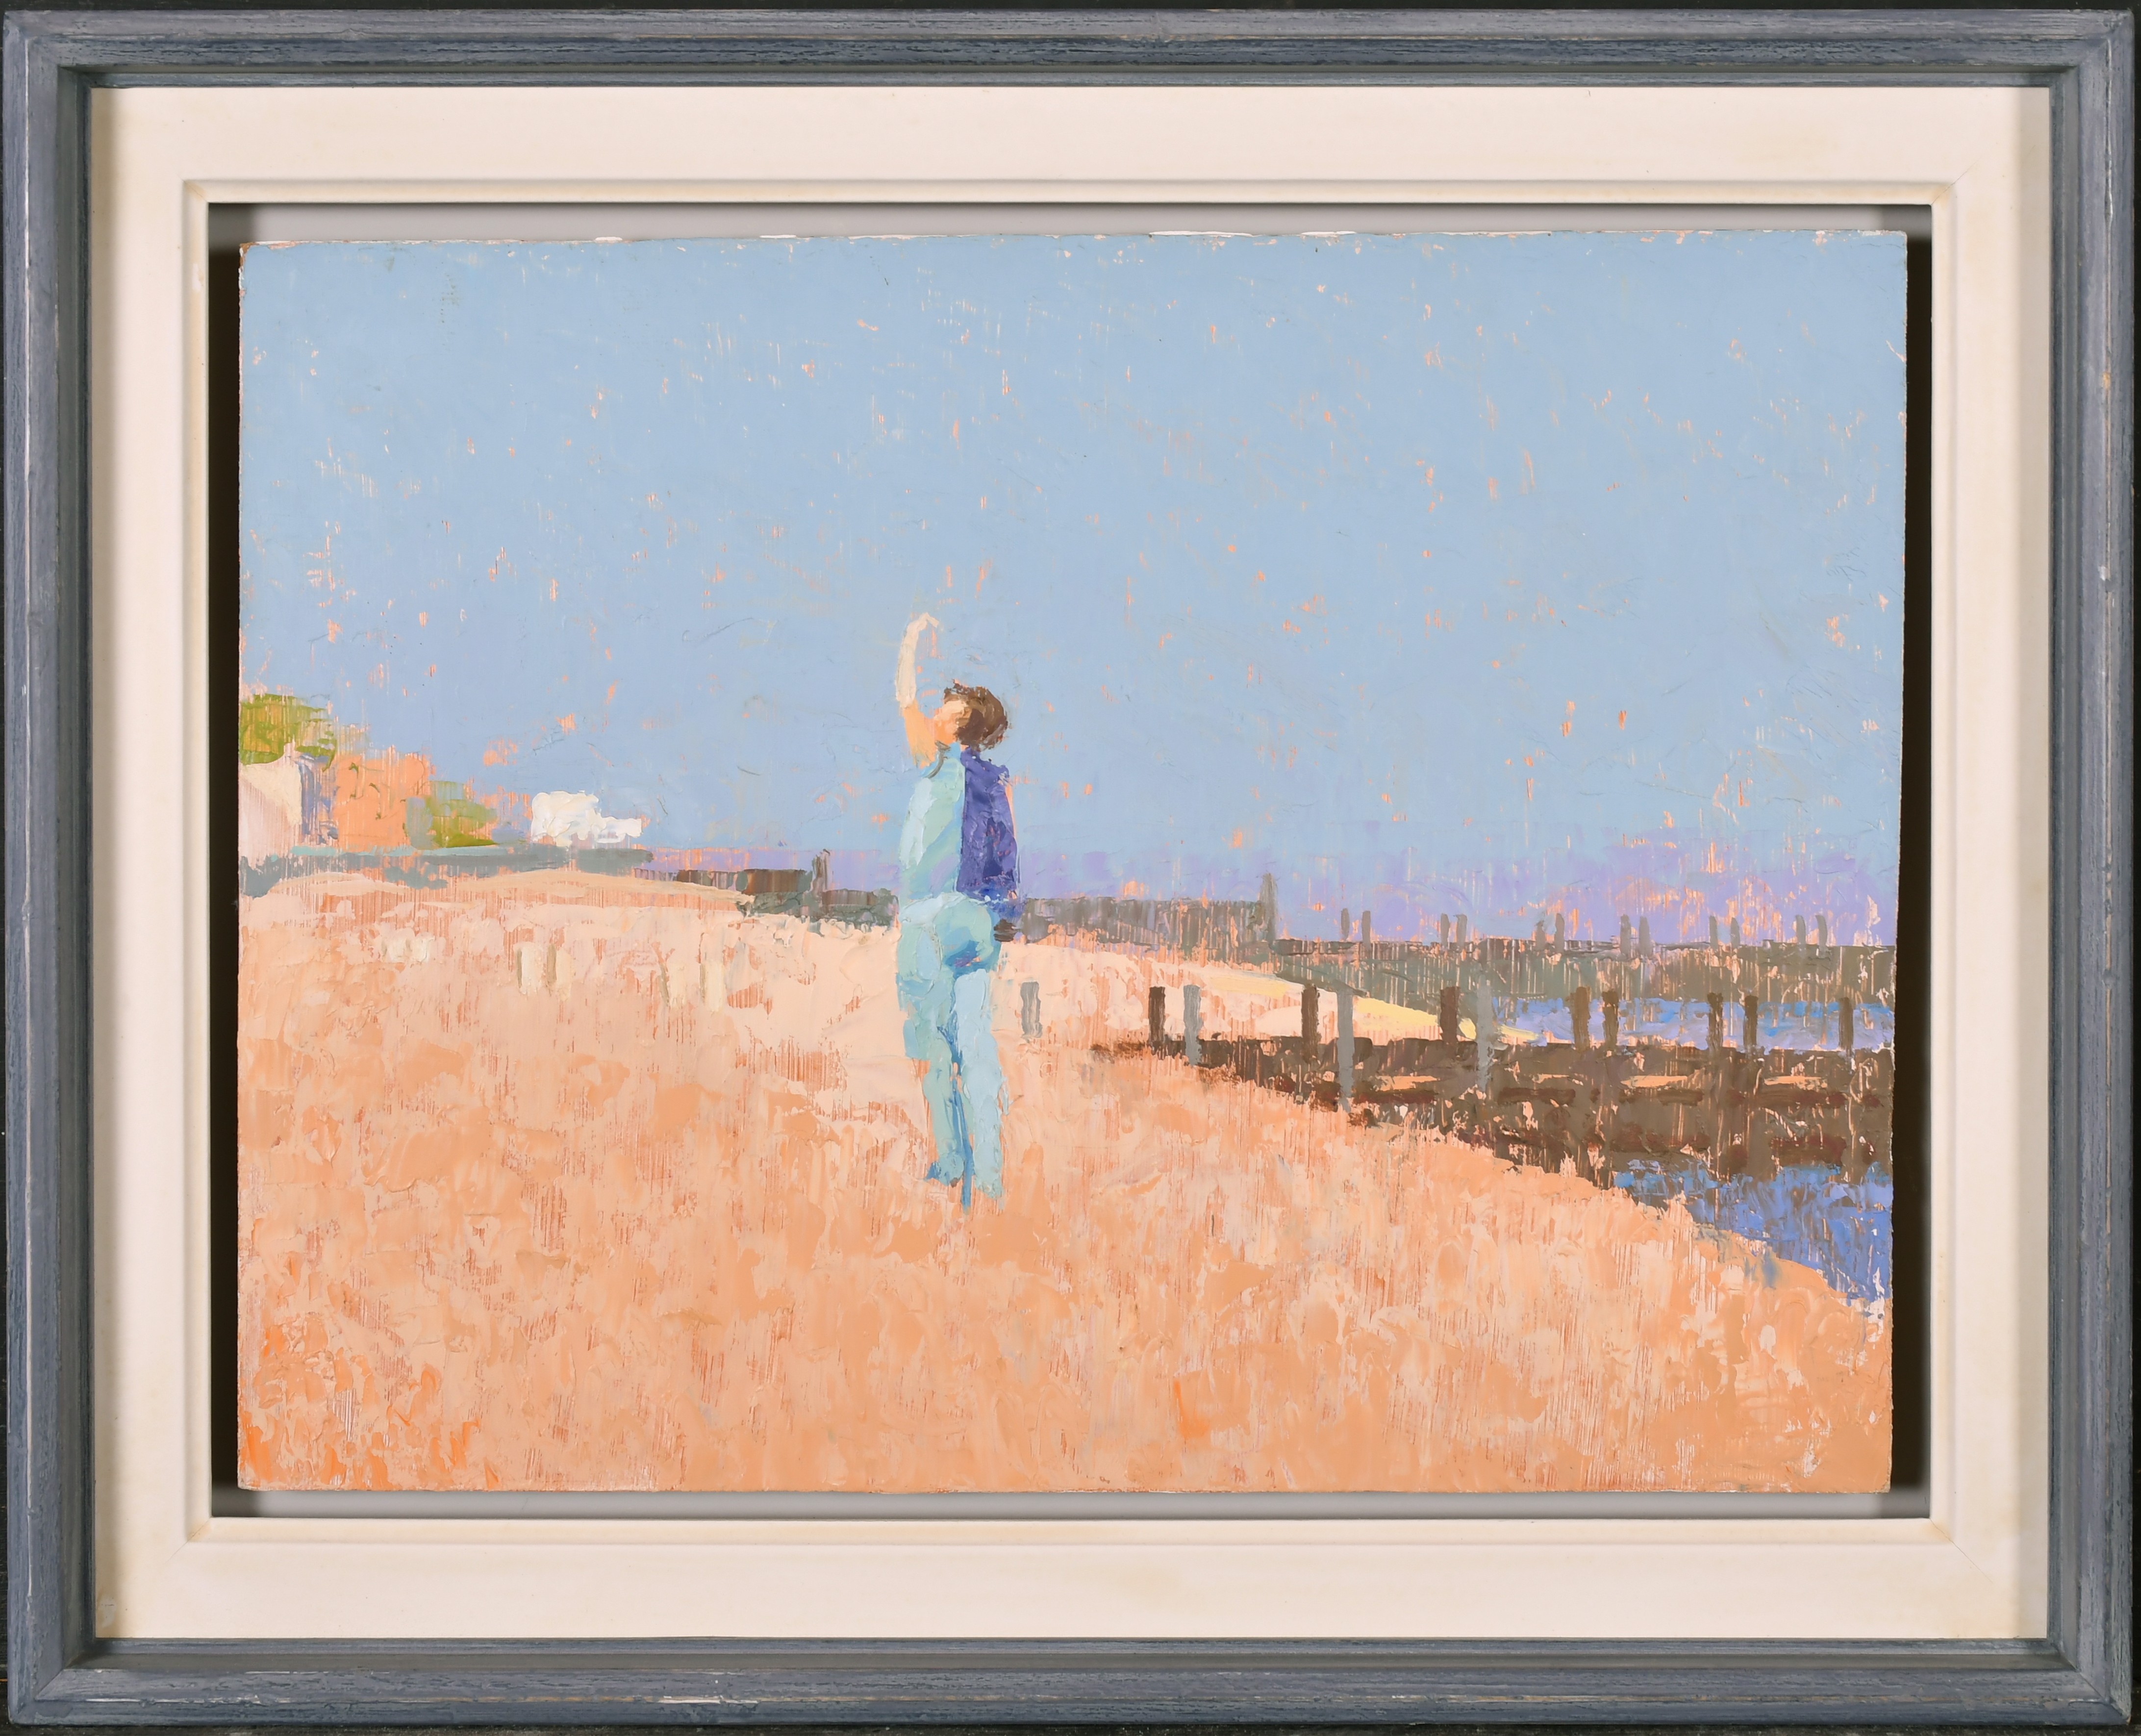 Lionel Bulmer (1919-1992) British. "Towards Southwold", Oil on board, Inscribed on labels verso, 12" - Image 2 of 4